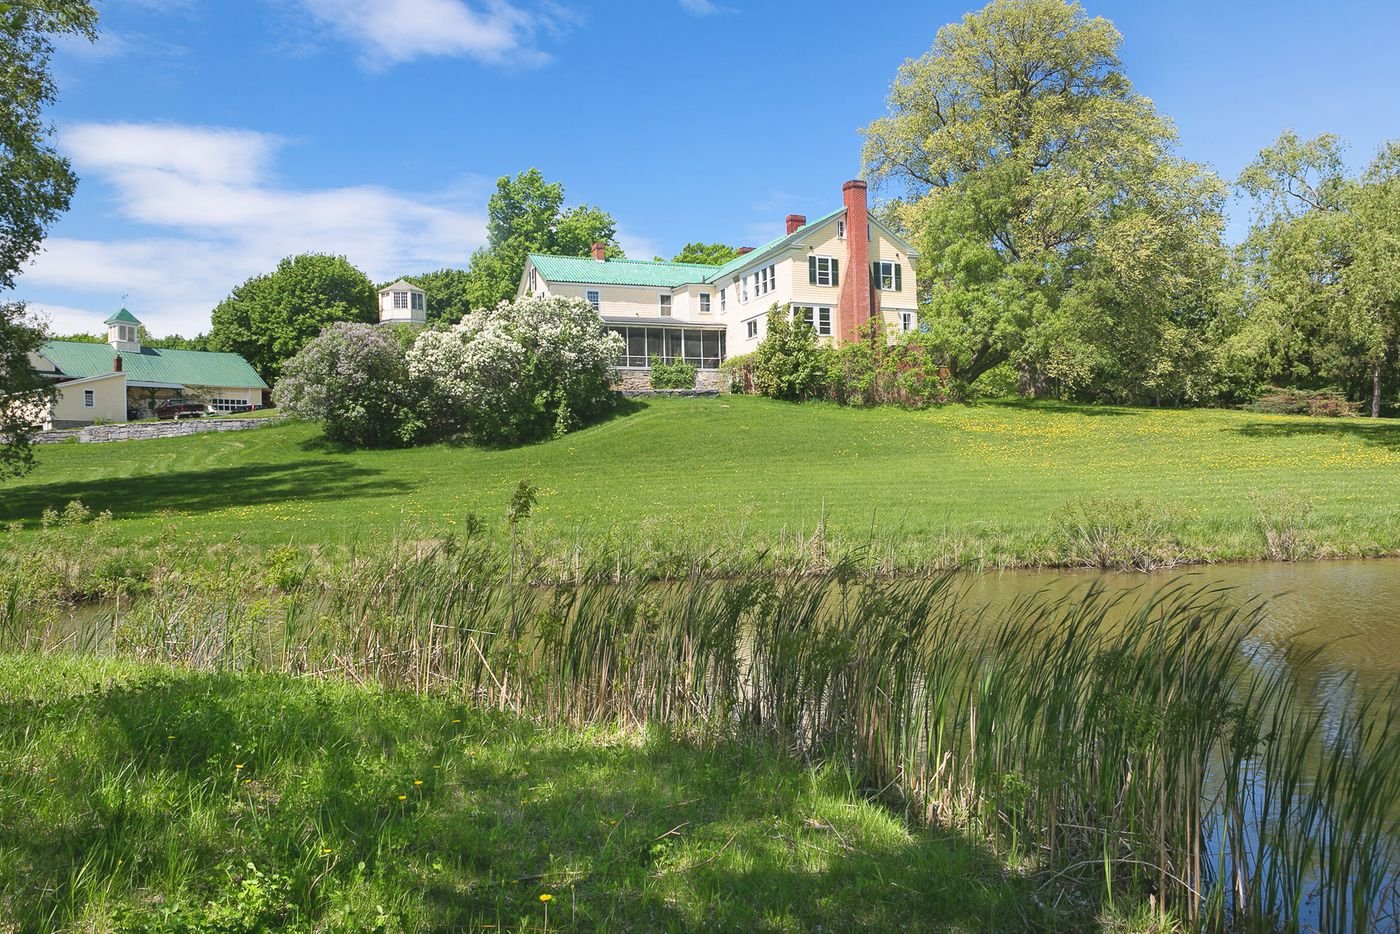 Francis York This New England Estate Comes with a Restored 18th Century Farmhouse and Entertainment Barns 2.jpeg